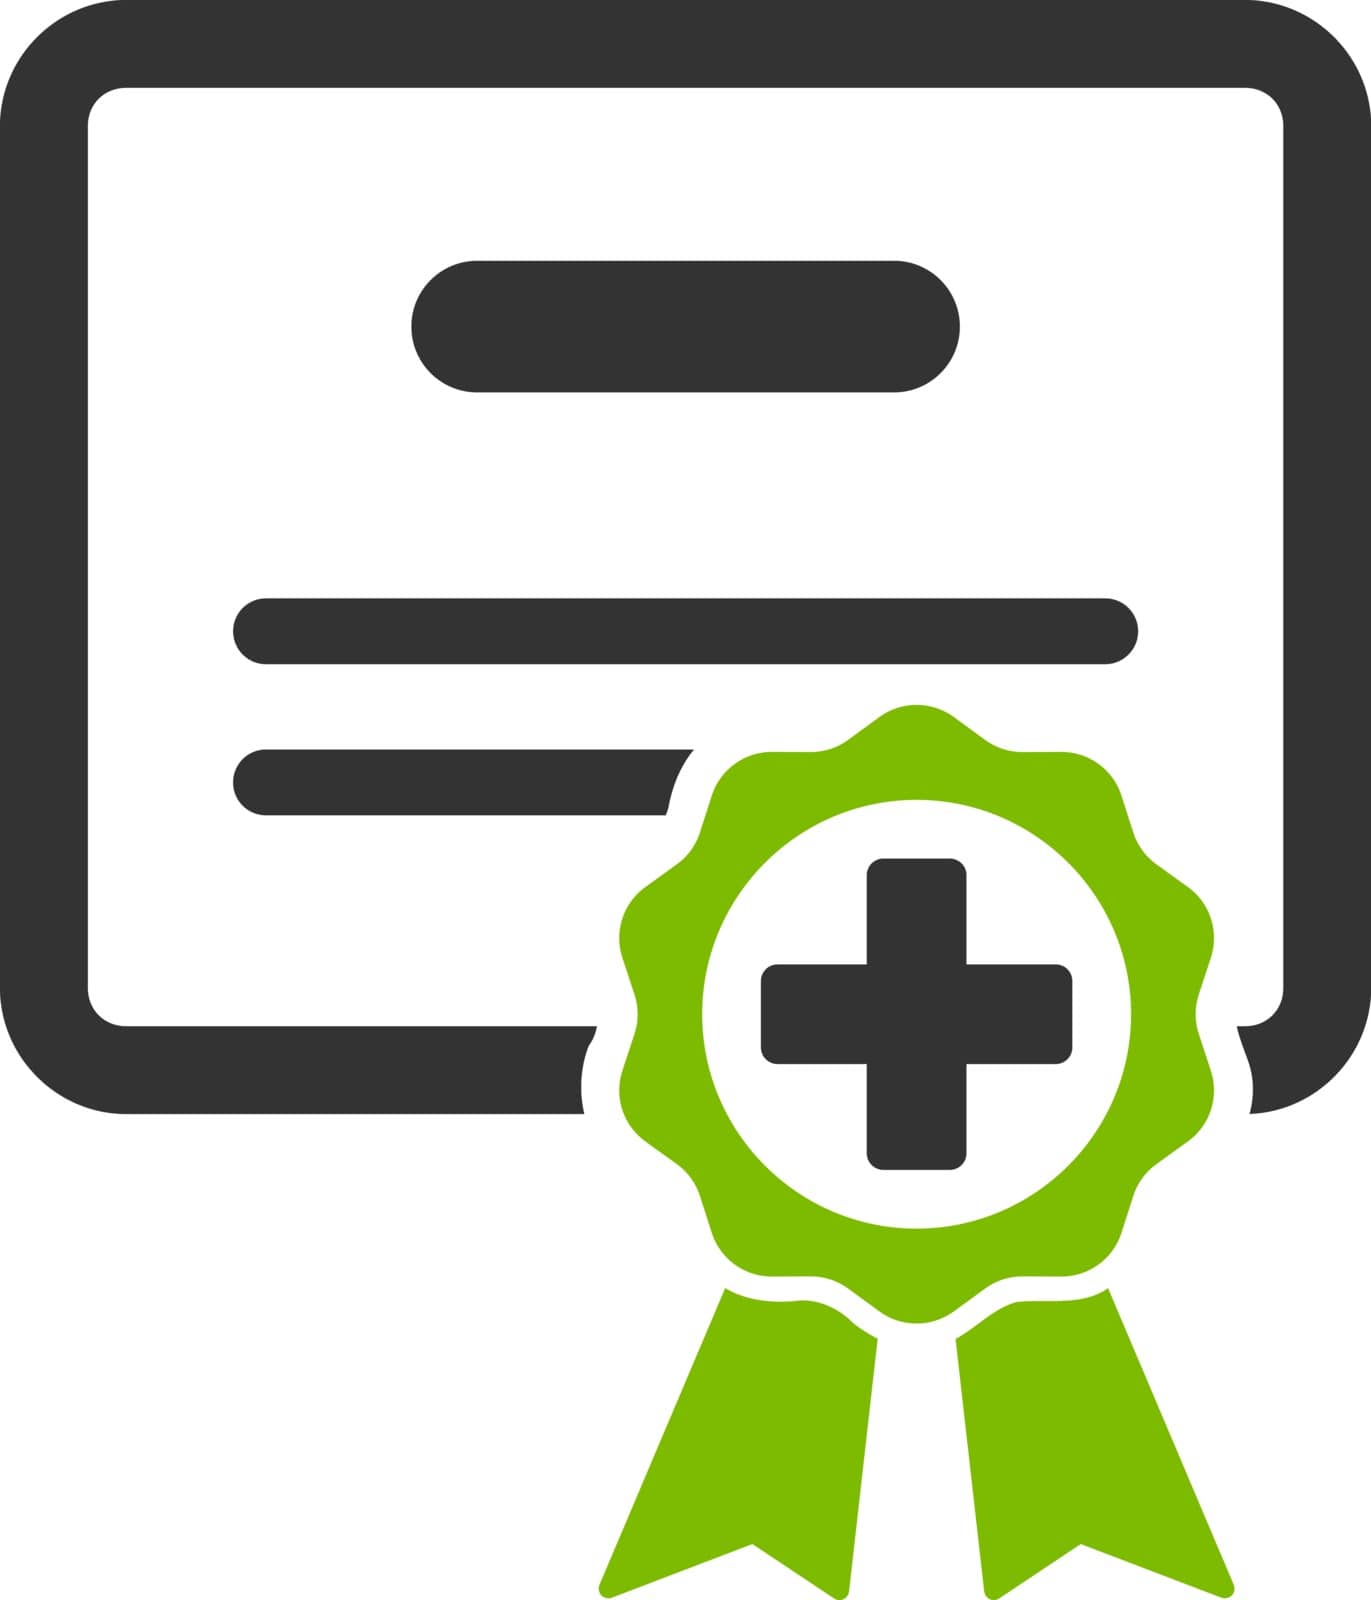 Medical Certificate vector icon. Style is bicolor flat symbol, eco green and gray colors, rounded angles, white background.